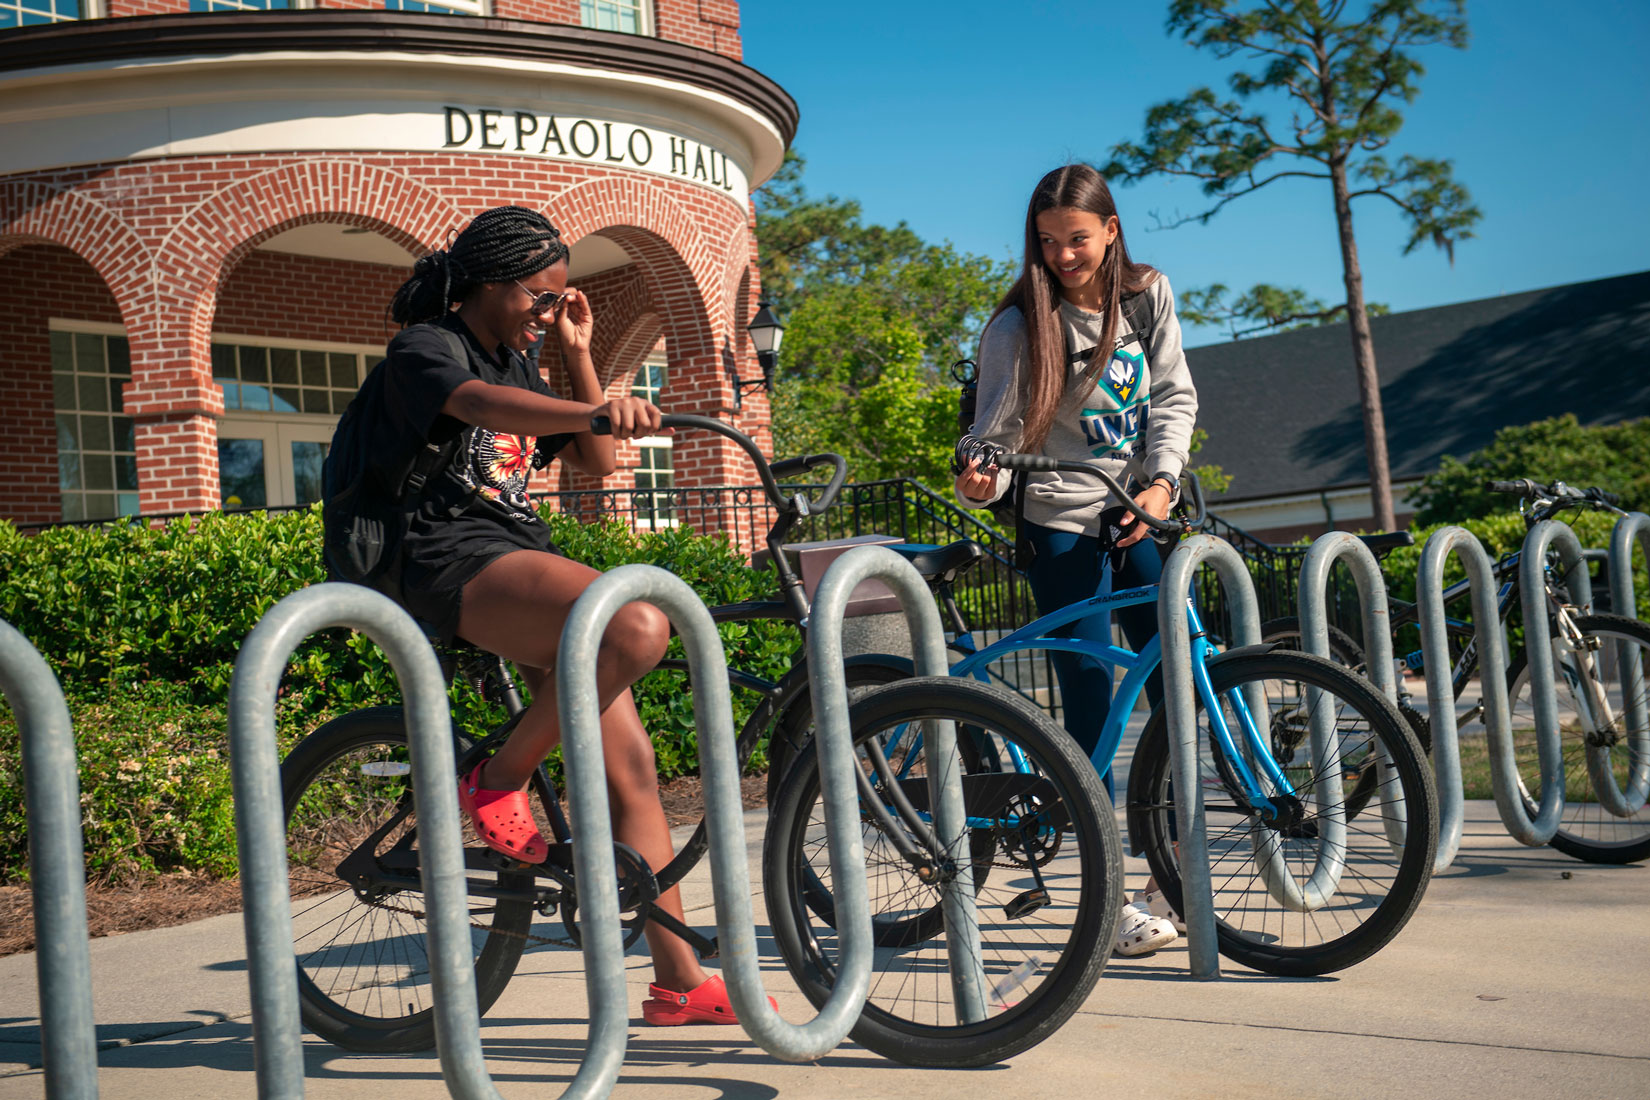 UNCW has been recognized for its efforts to promote safe, accessible bicycling on campus.